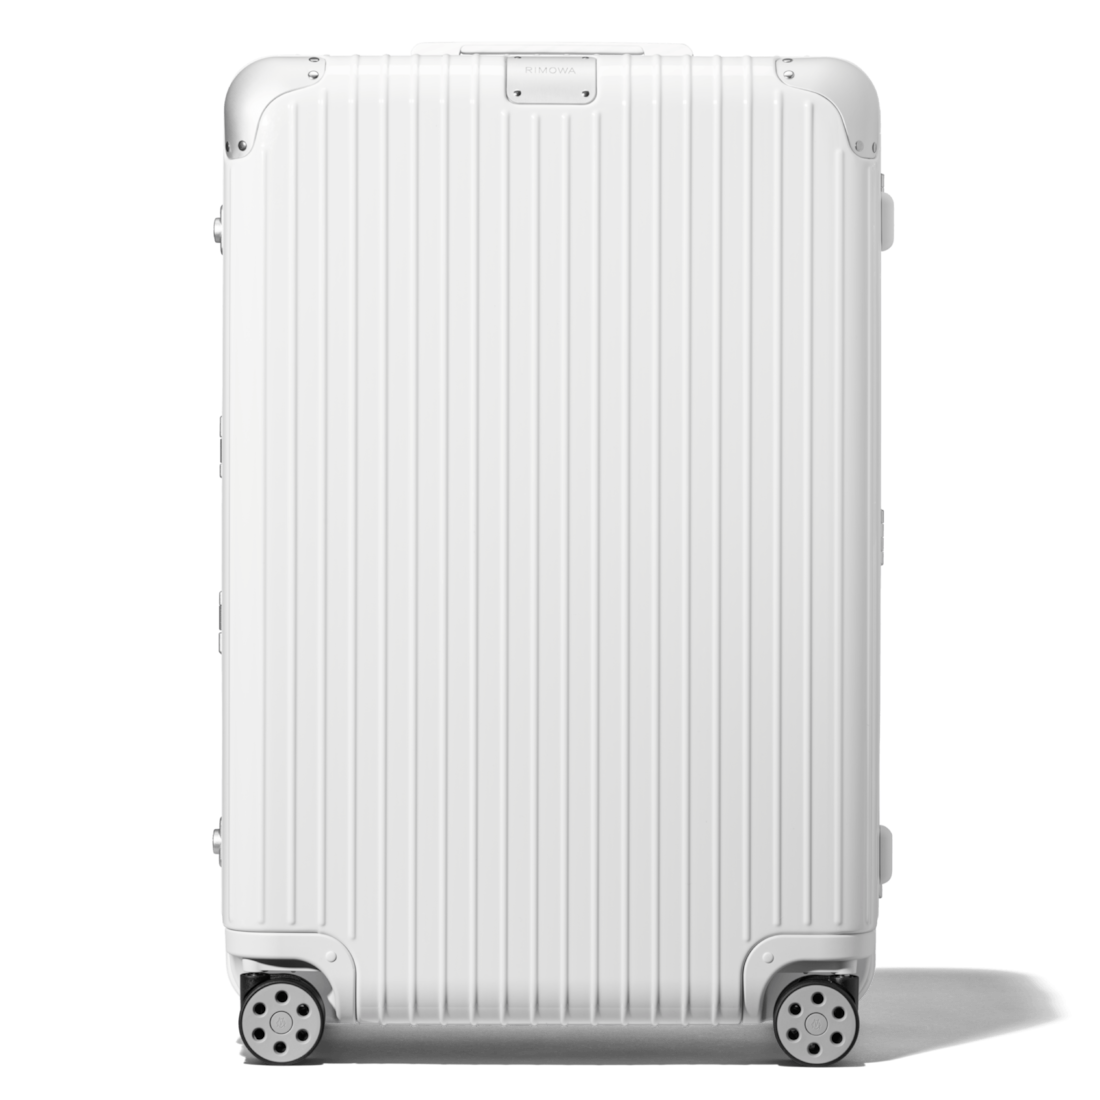 Rimowa Polycarbonate In Brown